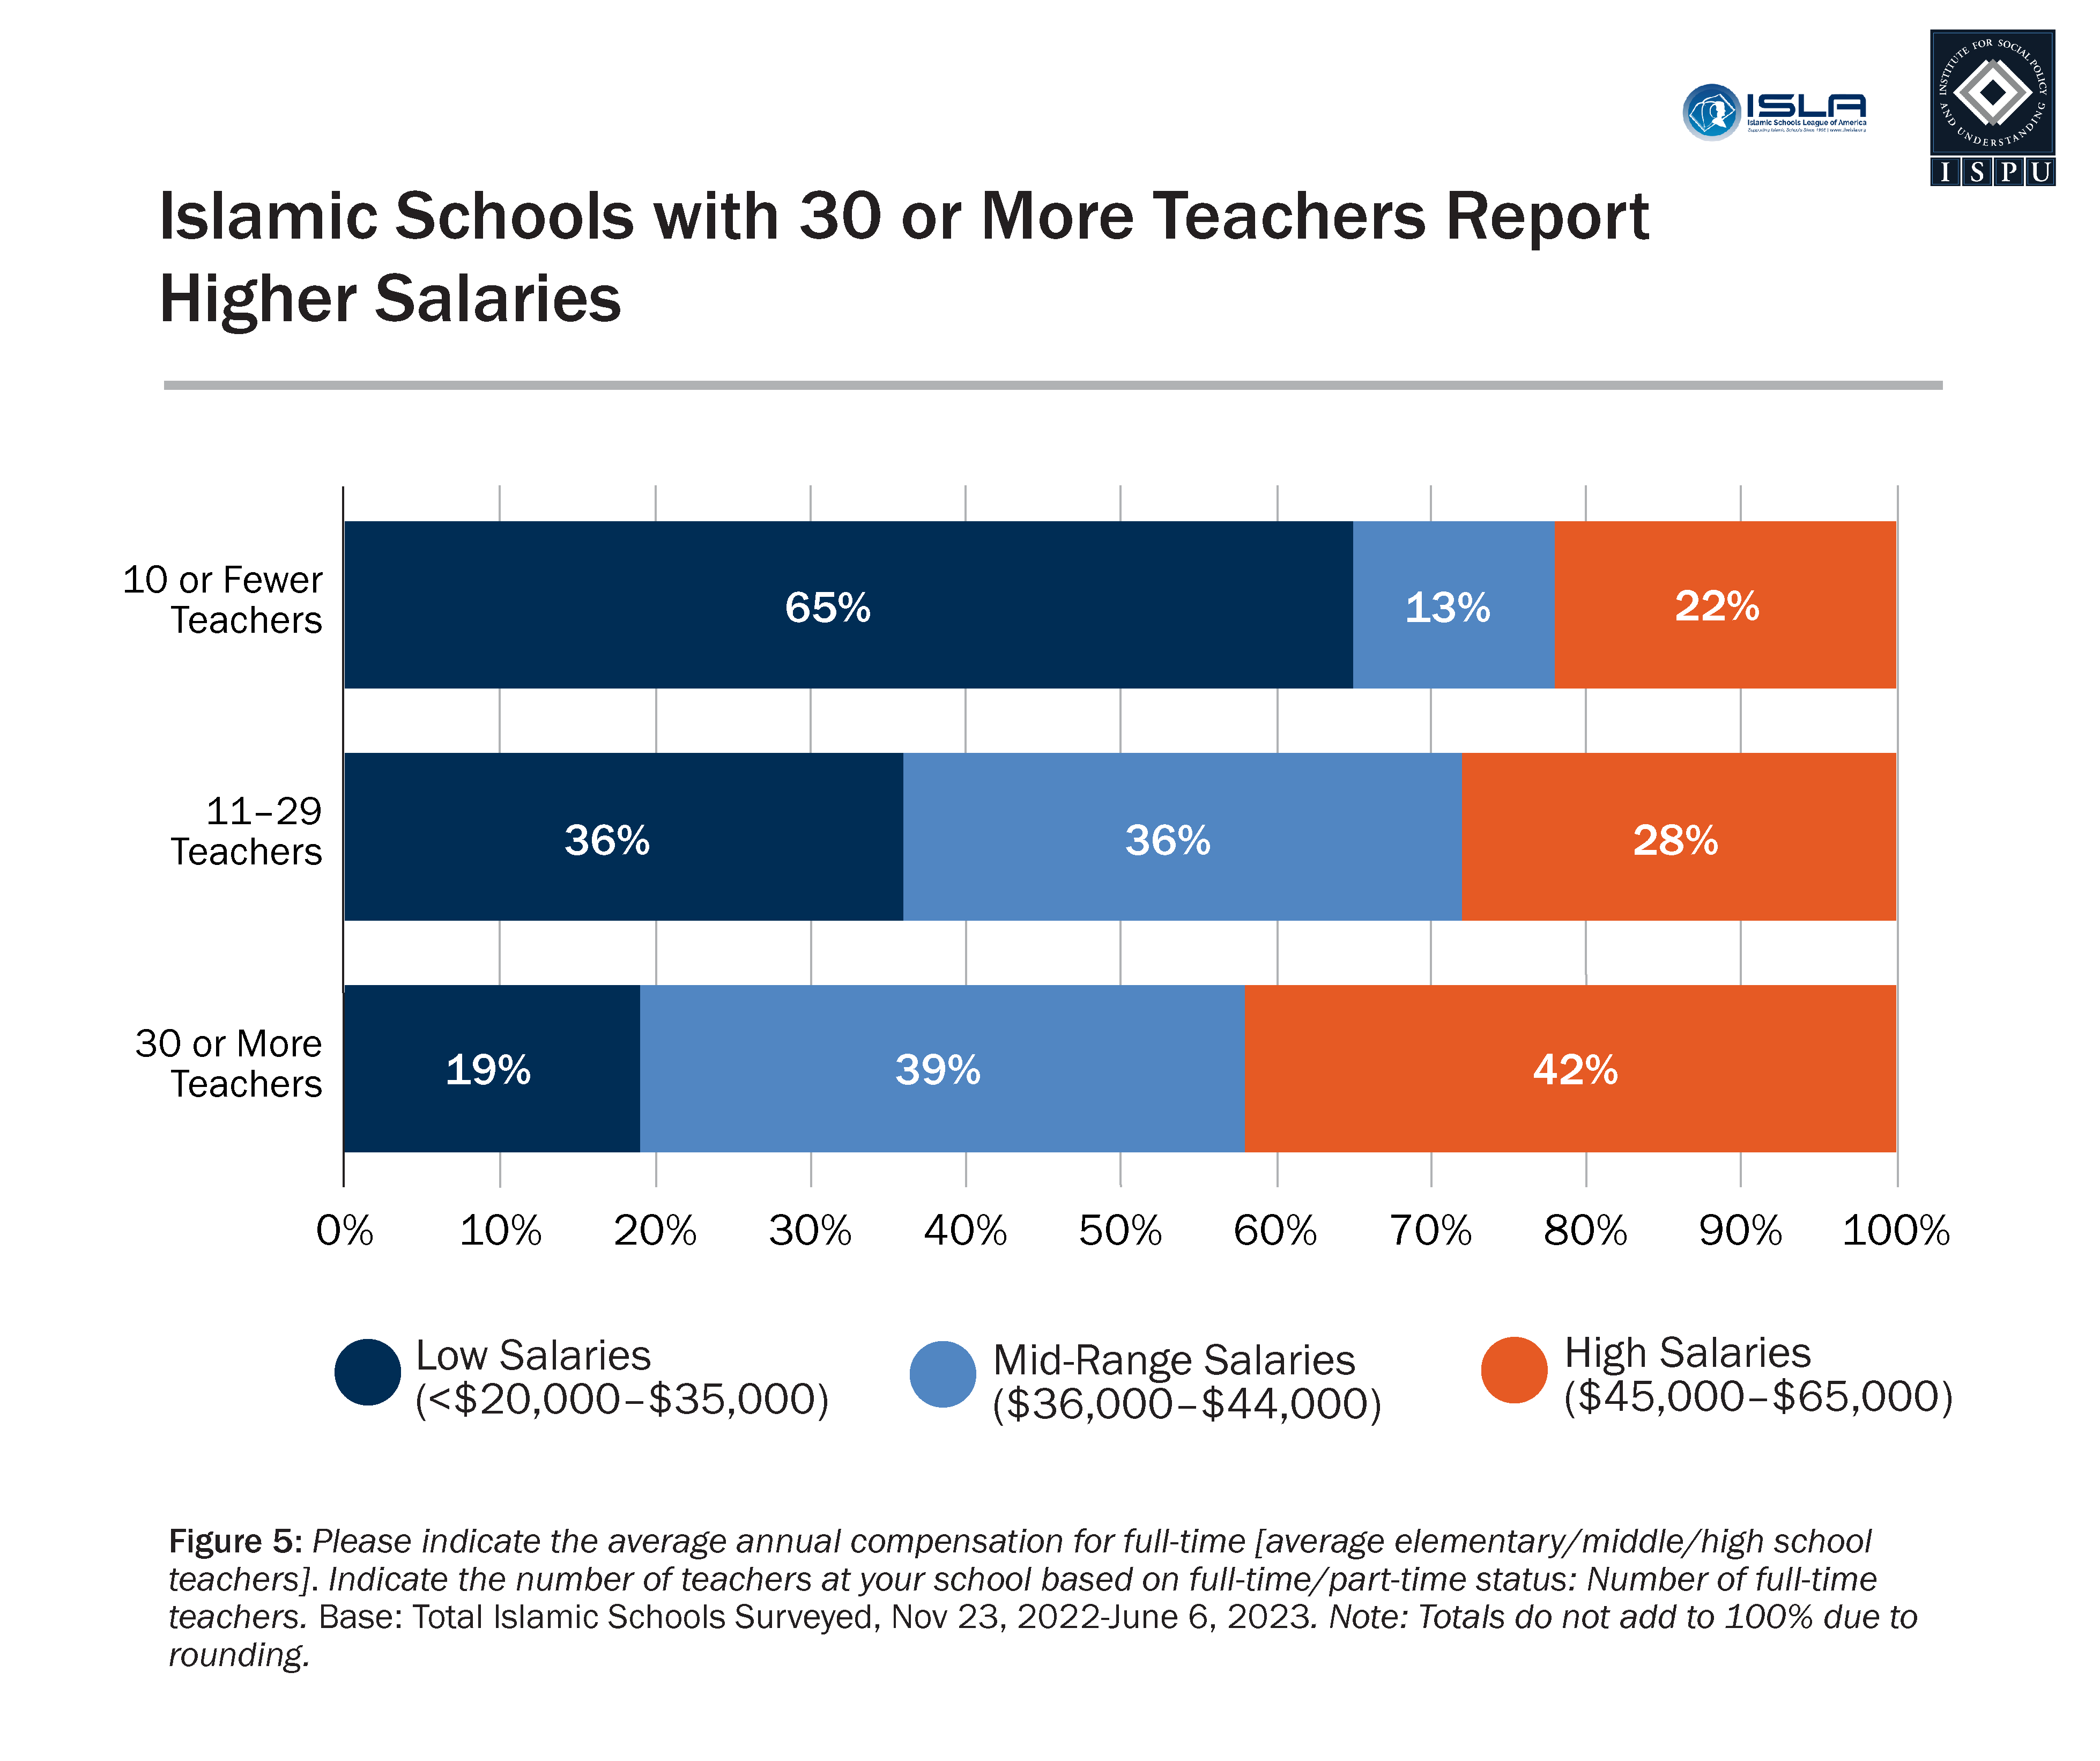 A horizontal bar graph describing the proportion of Islamic schools at low, mid-range, and high salaries based on the number of full-time teachers at the school.